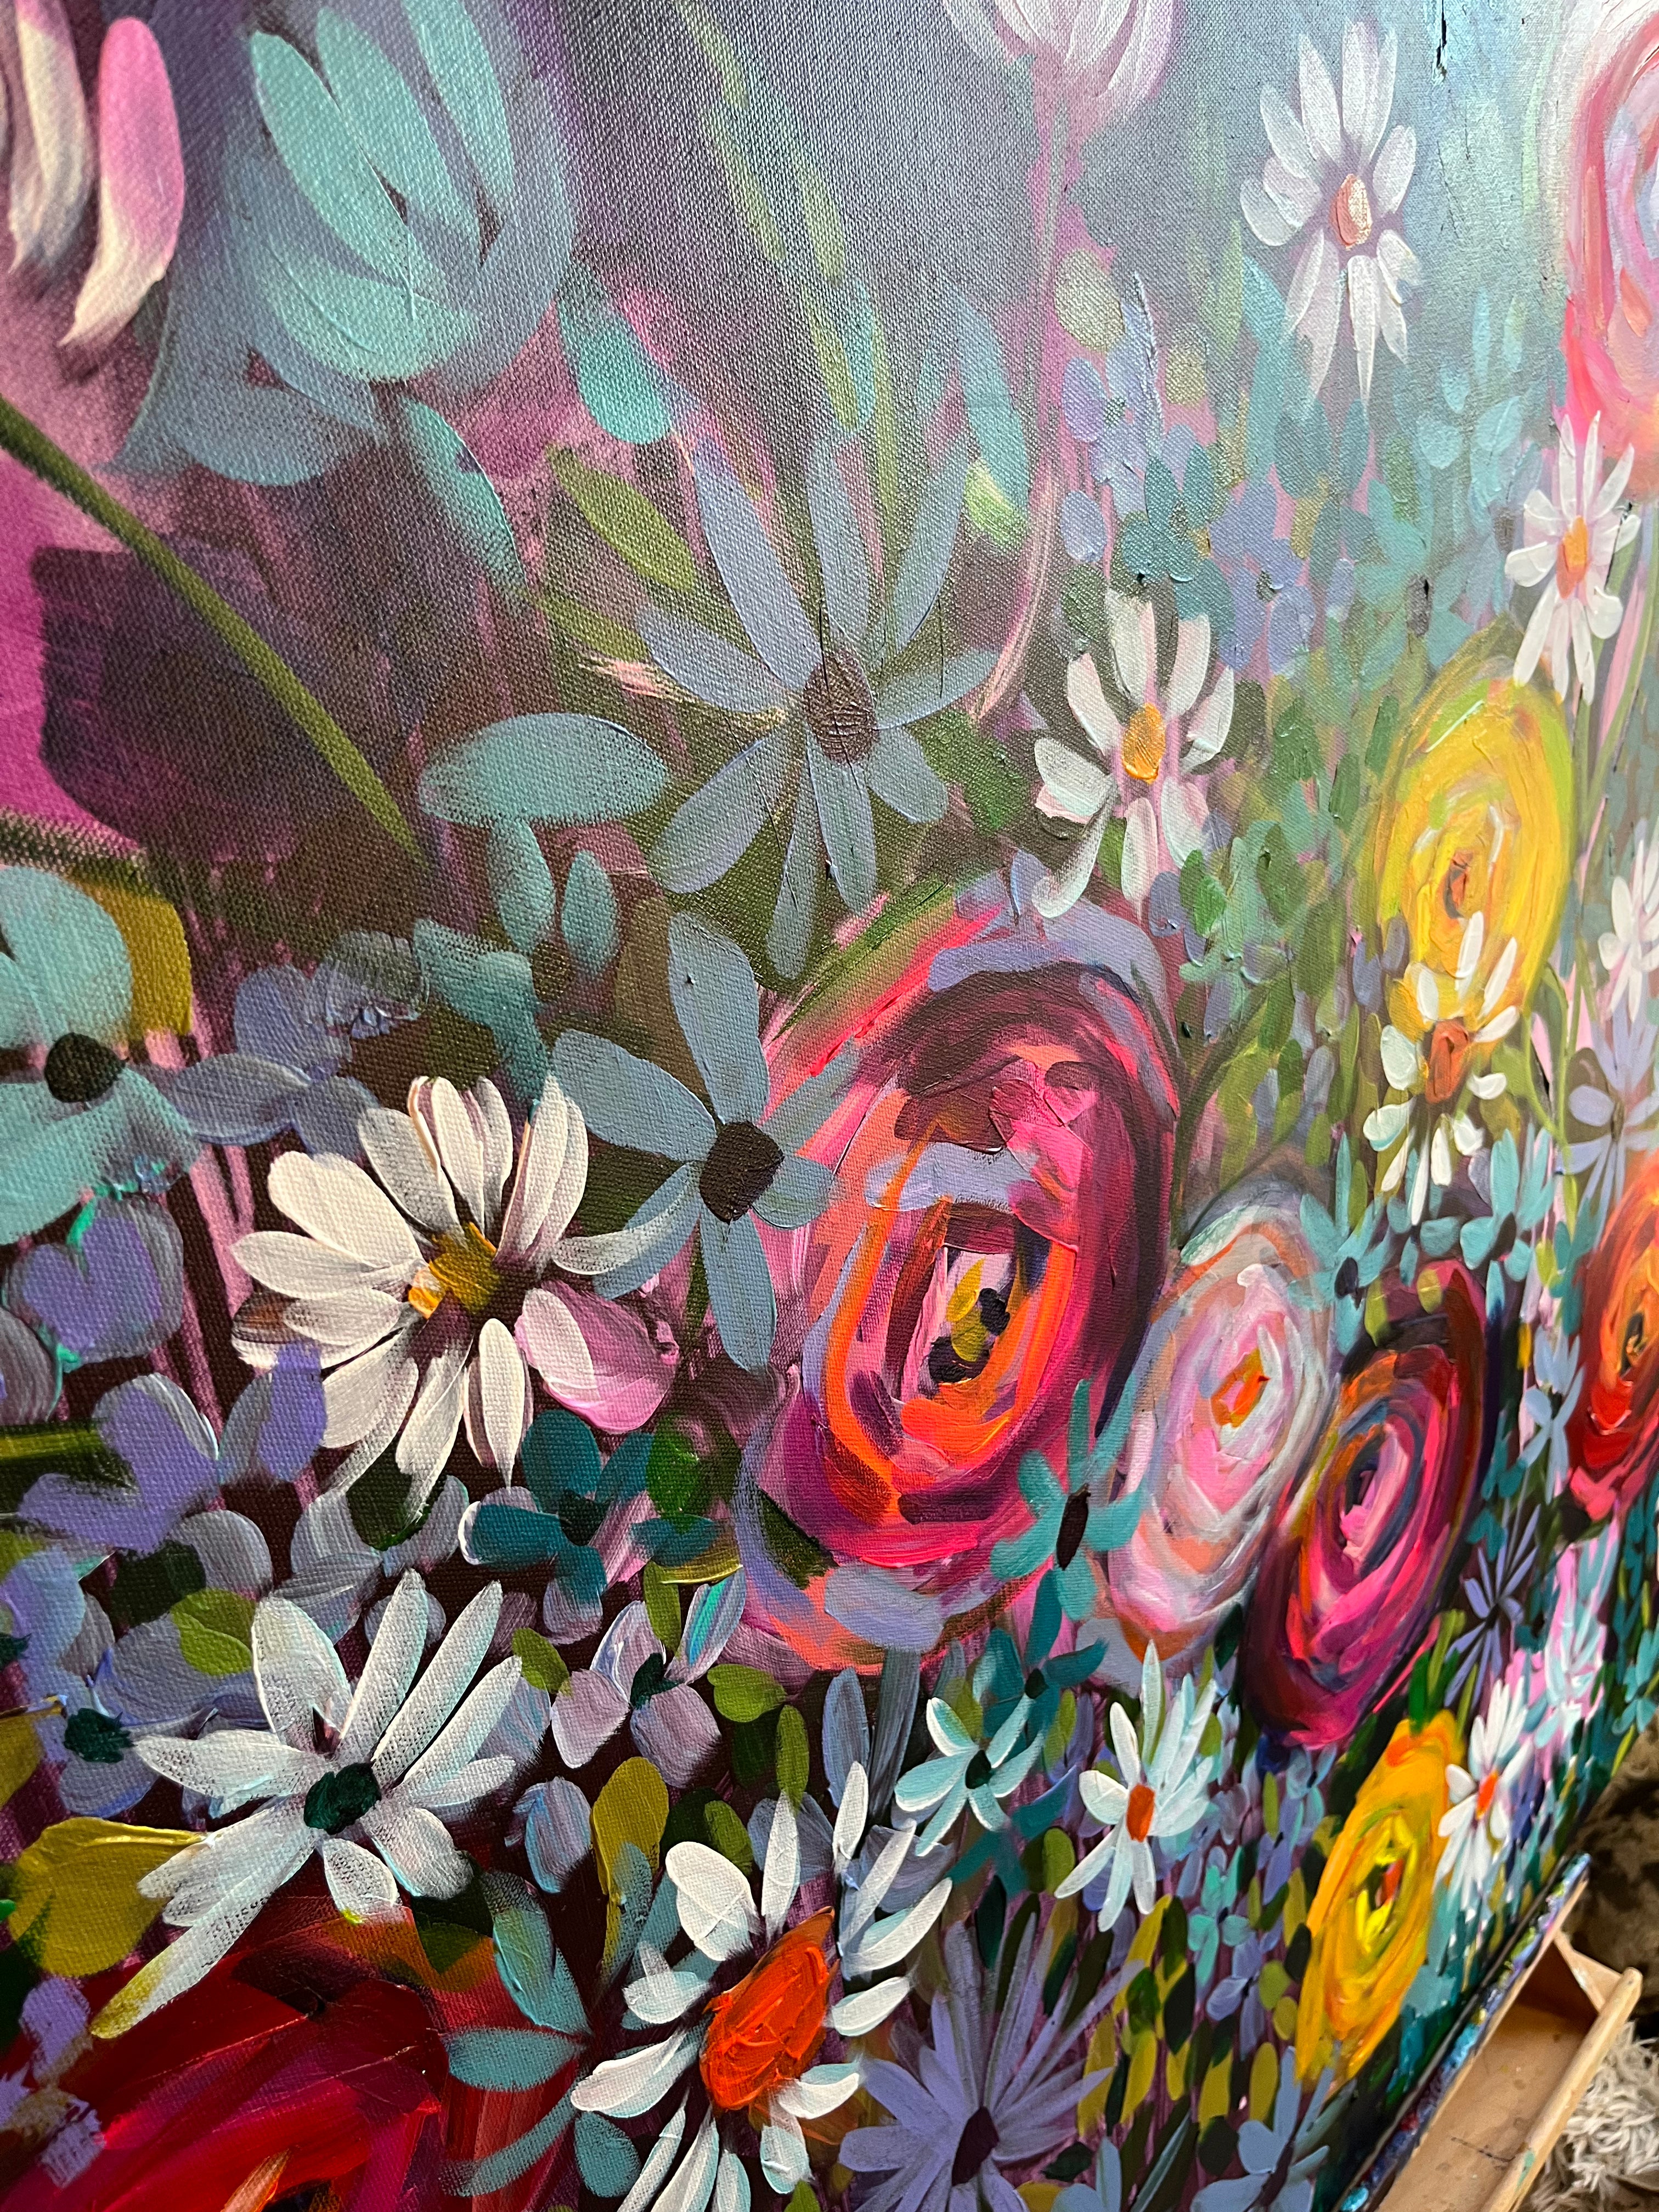 Large 36” Midnight Floral painting